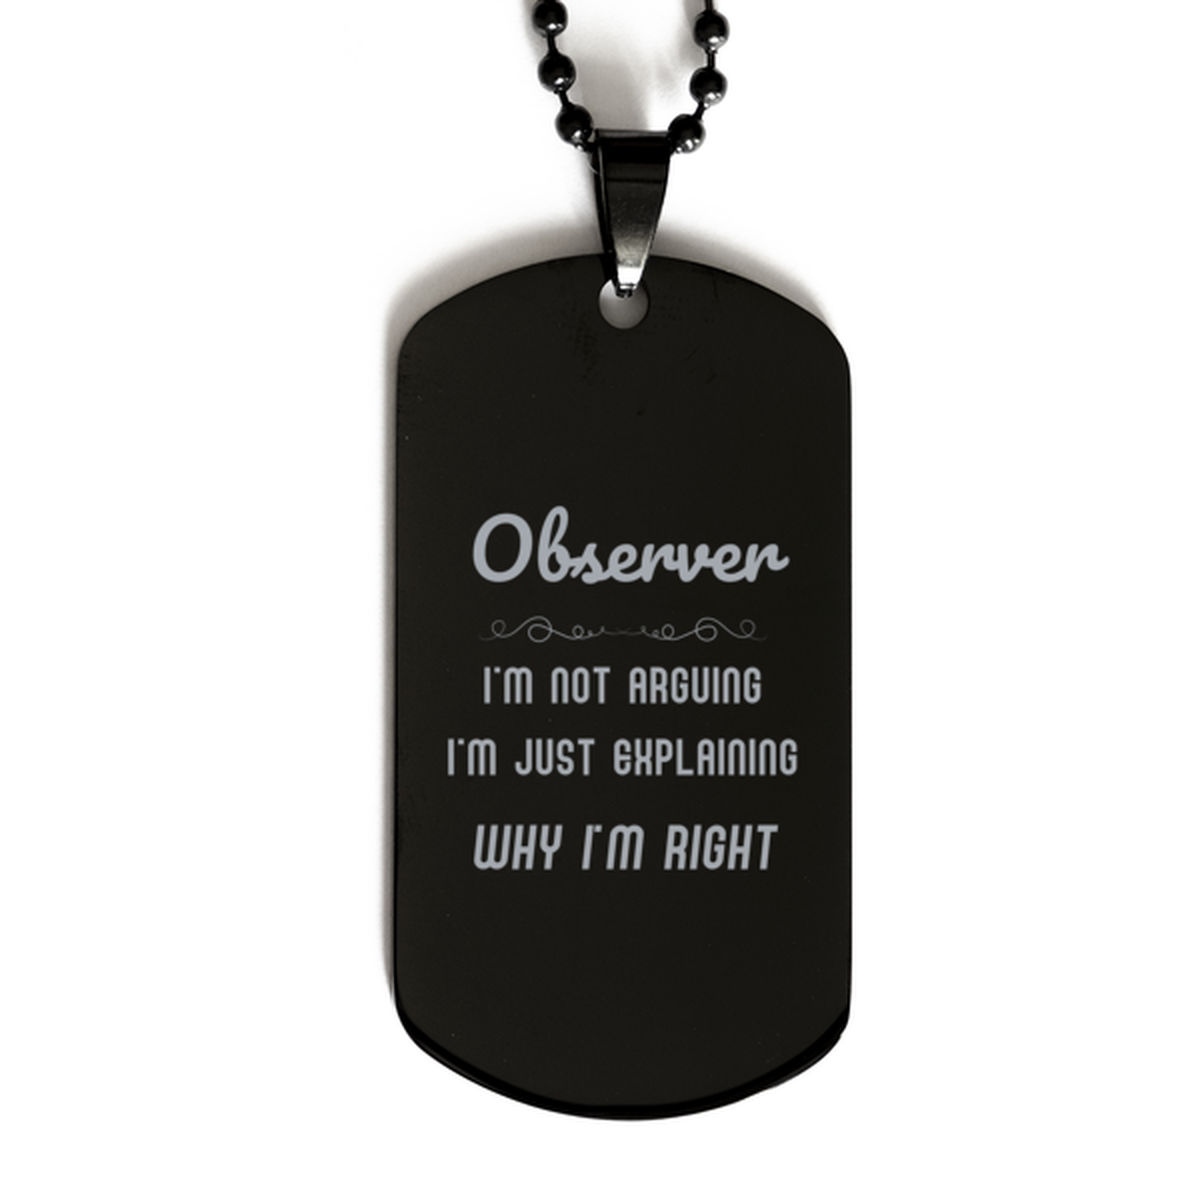 Observer I'm not Arguing. I'm Just Explaining Why I'm RIGHT Black Dog Tag, Funny Saying Quote Observer Gifts For Observer Graduation Birthday Christmas Gifts for Men Women Coworker